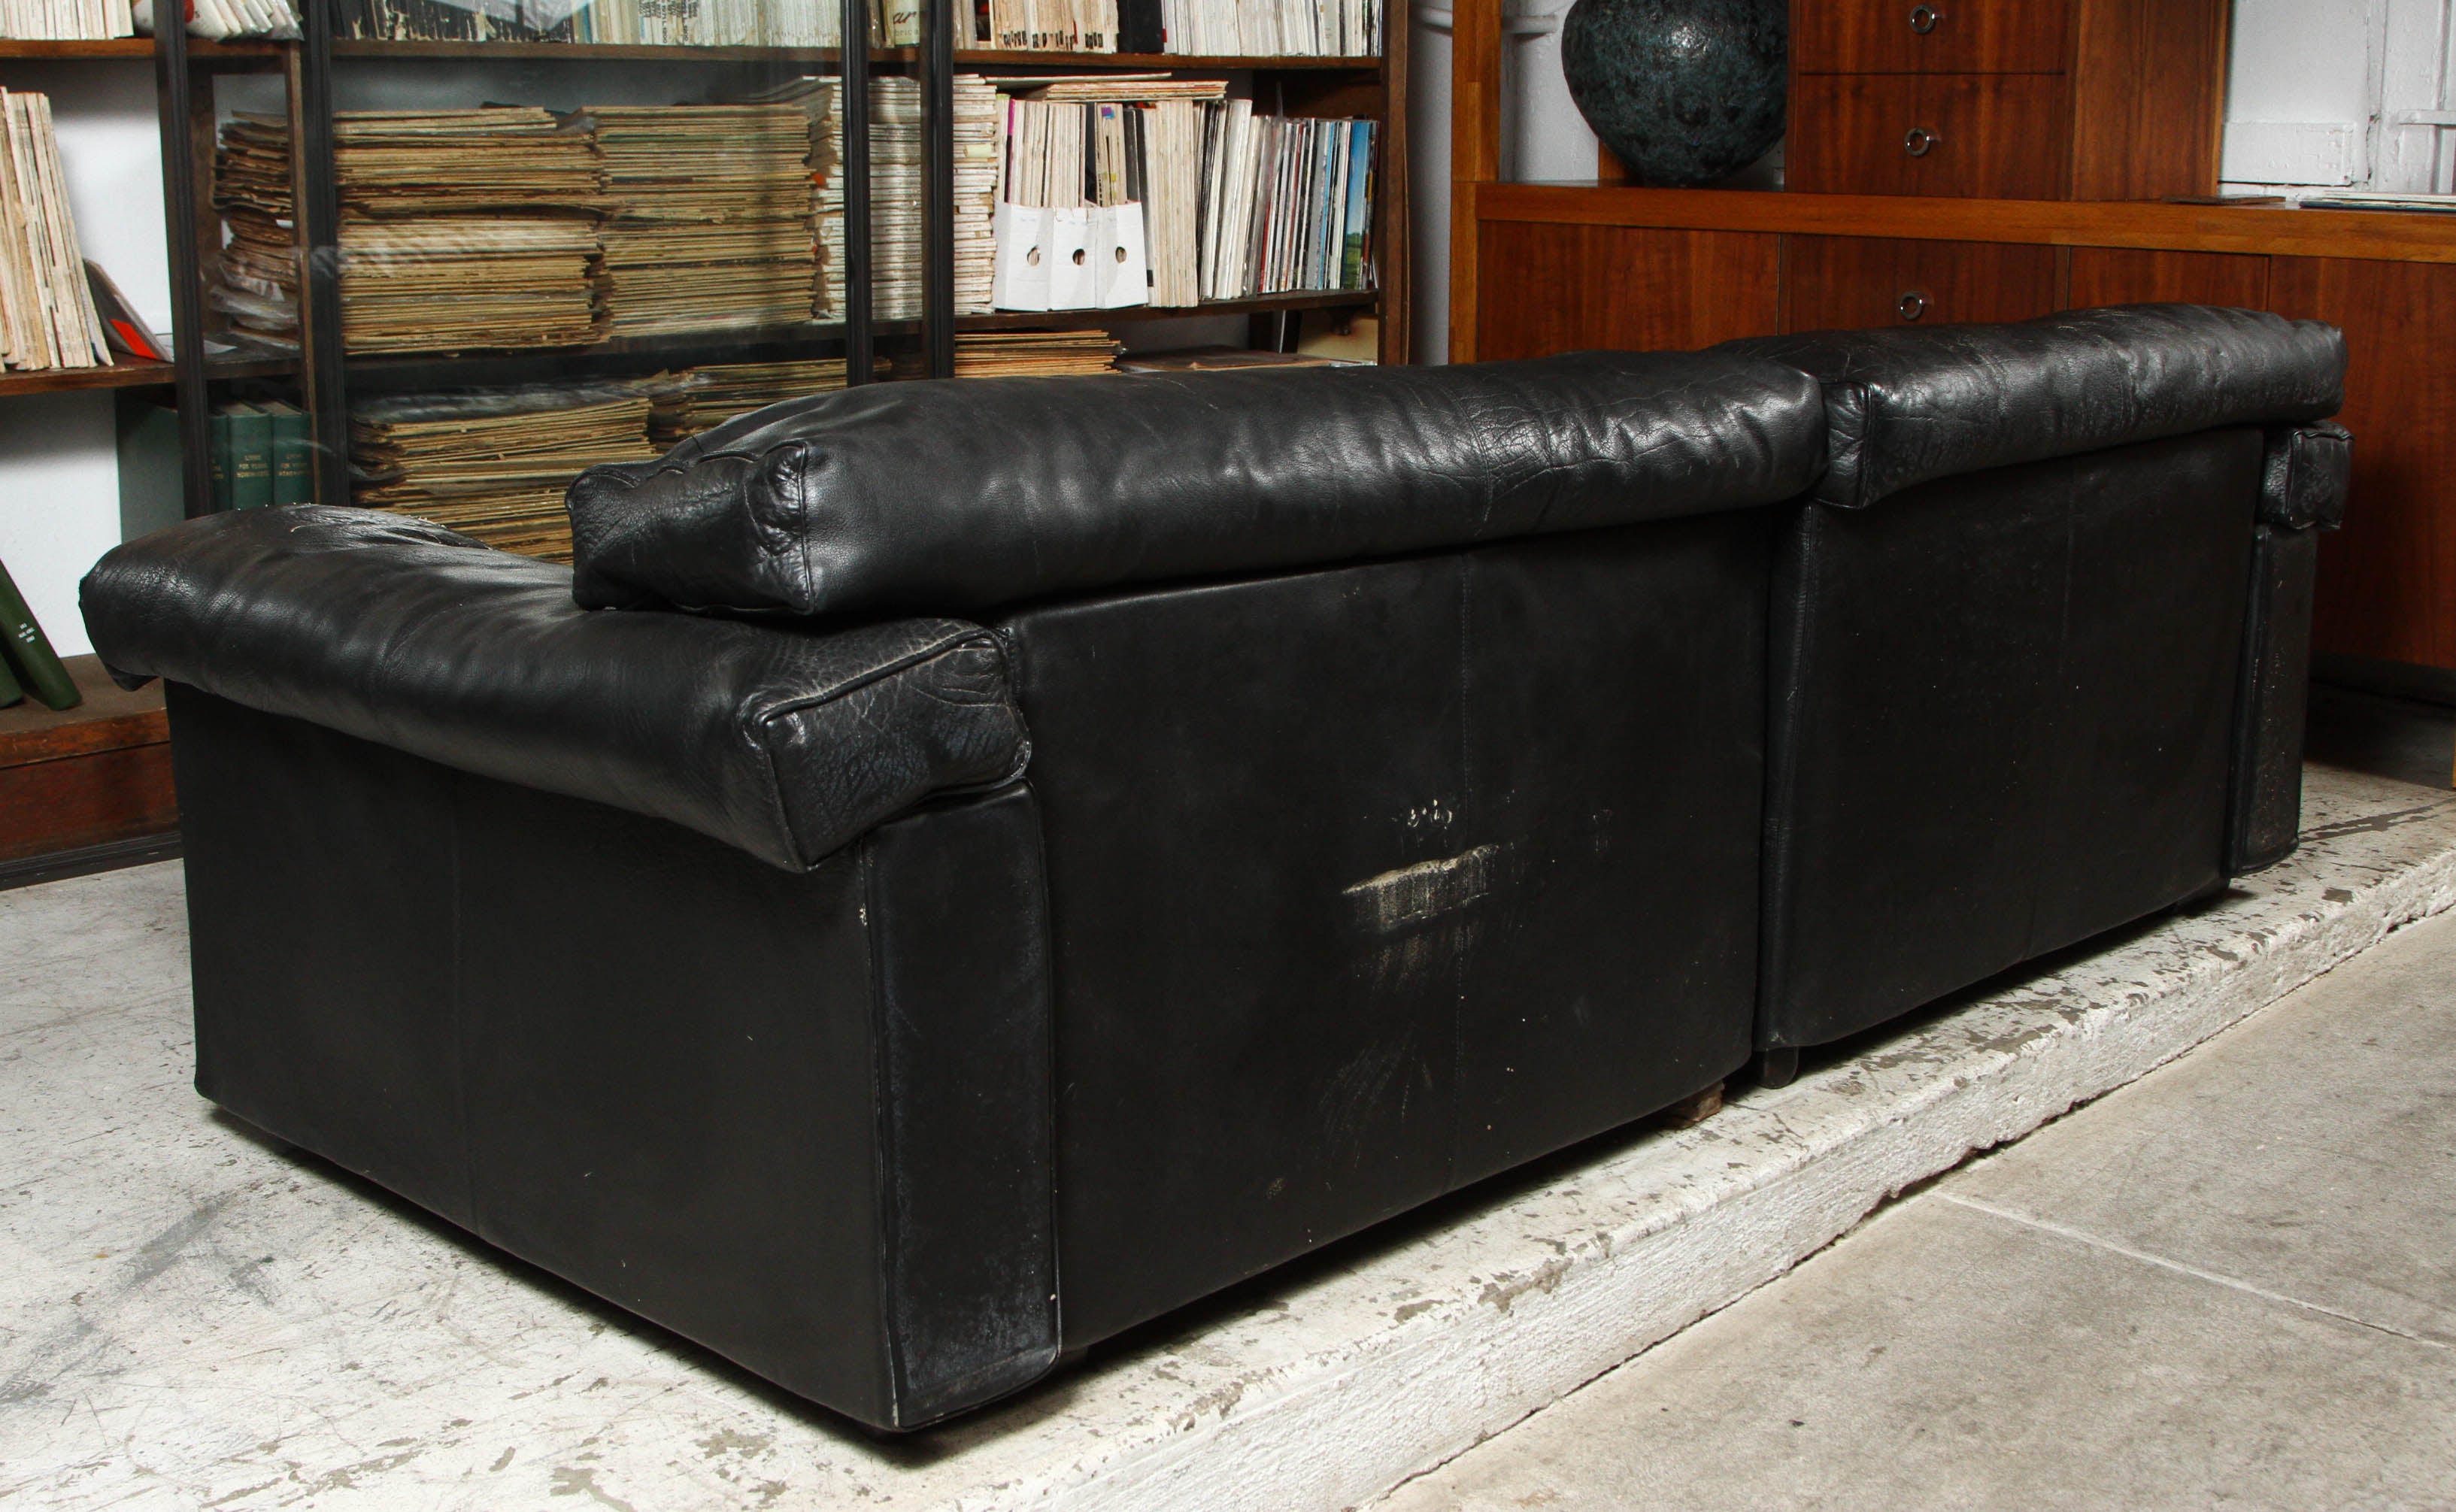 Black leather sofa with a nice worn in look. Designed by Tobia Scarpa for B & B Italia.